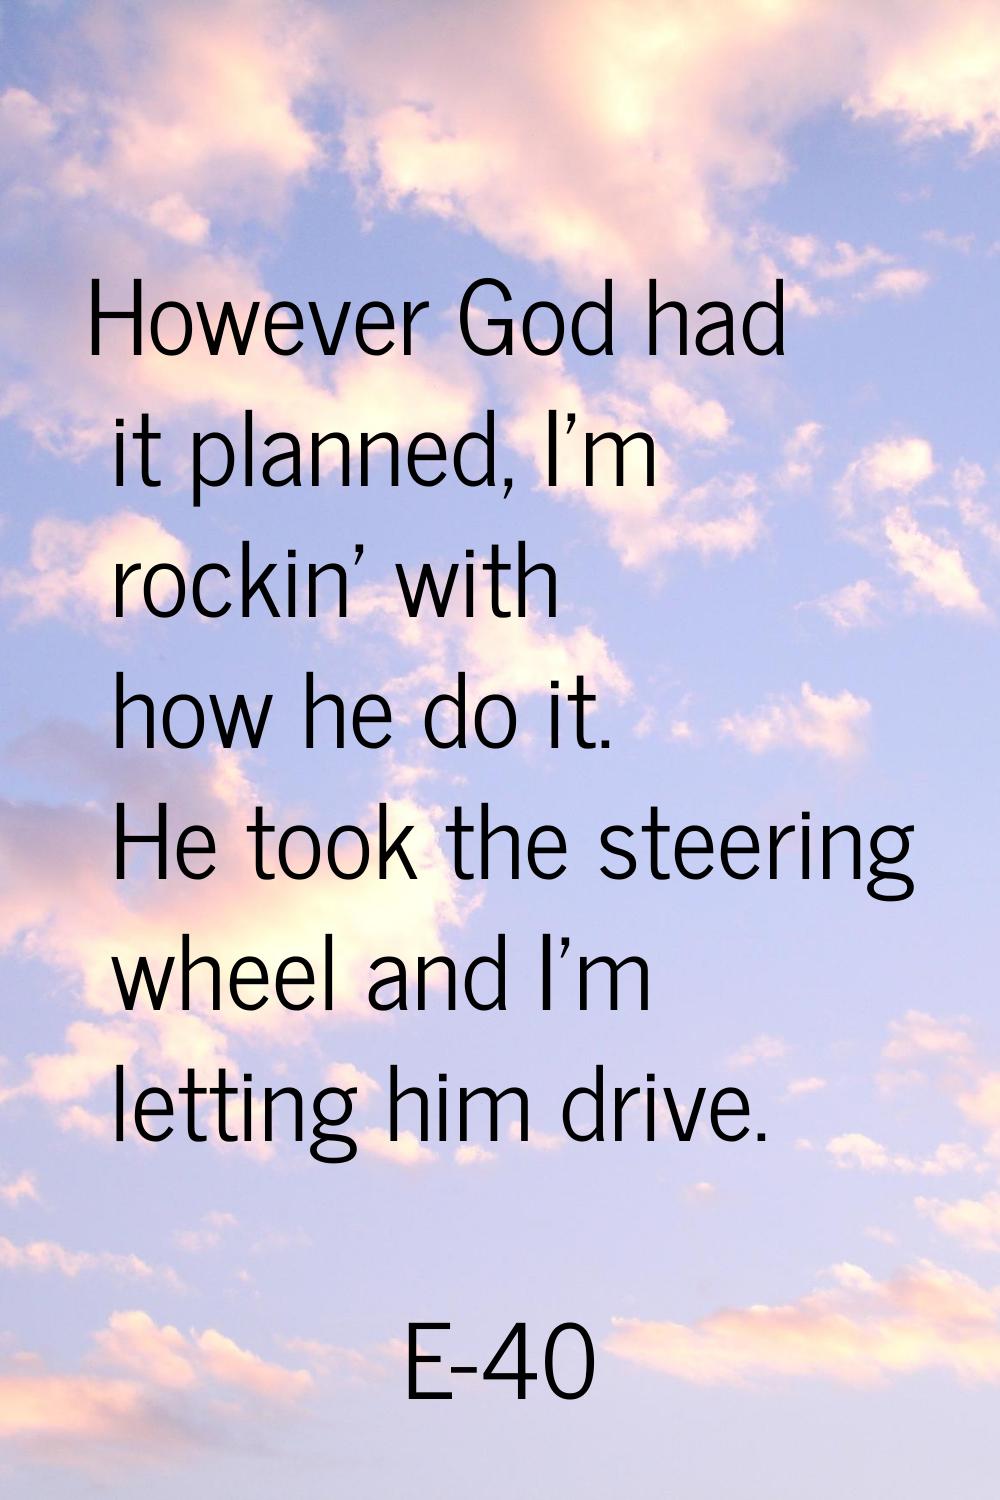 However God had it planned, I'm rockin' with how he do it. He took the steering wheel and I'm letti